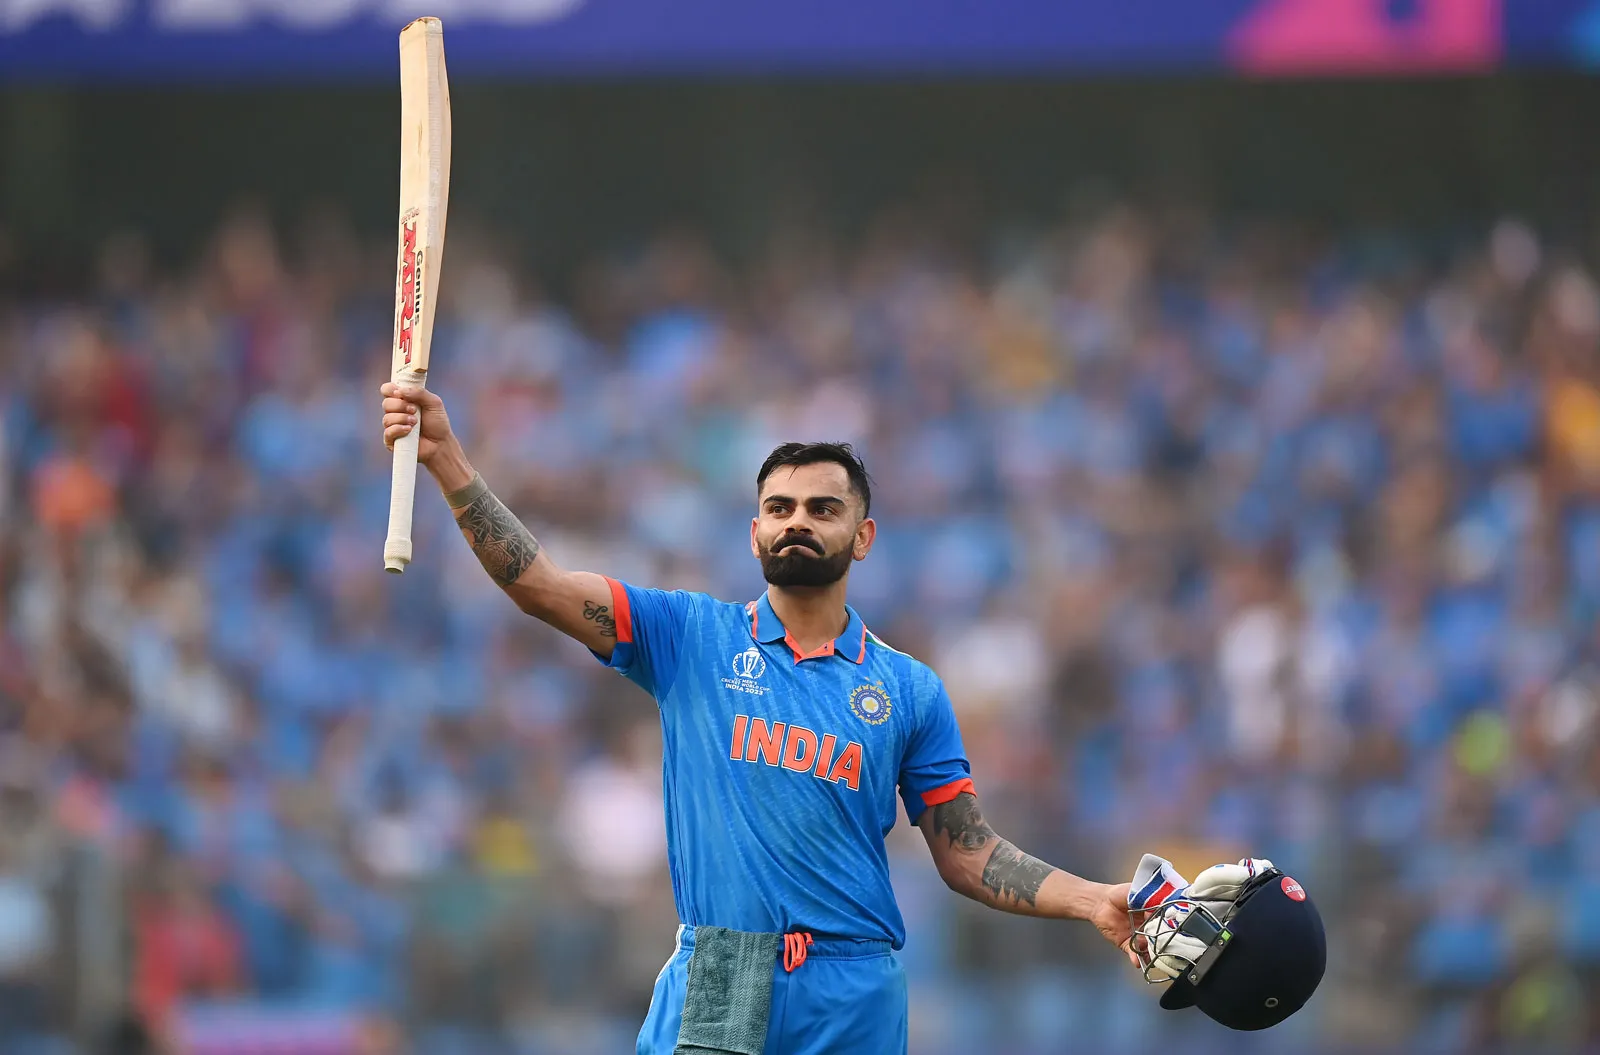 For a record-tying fourth time, Virat Kohli won the ICC Men's ODI Cricketer of the Year award